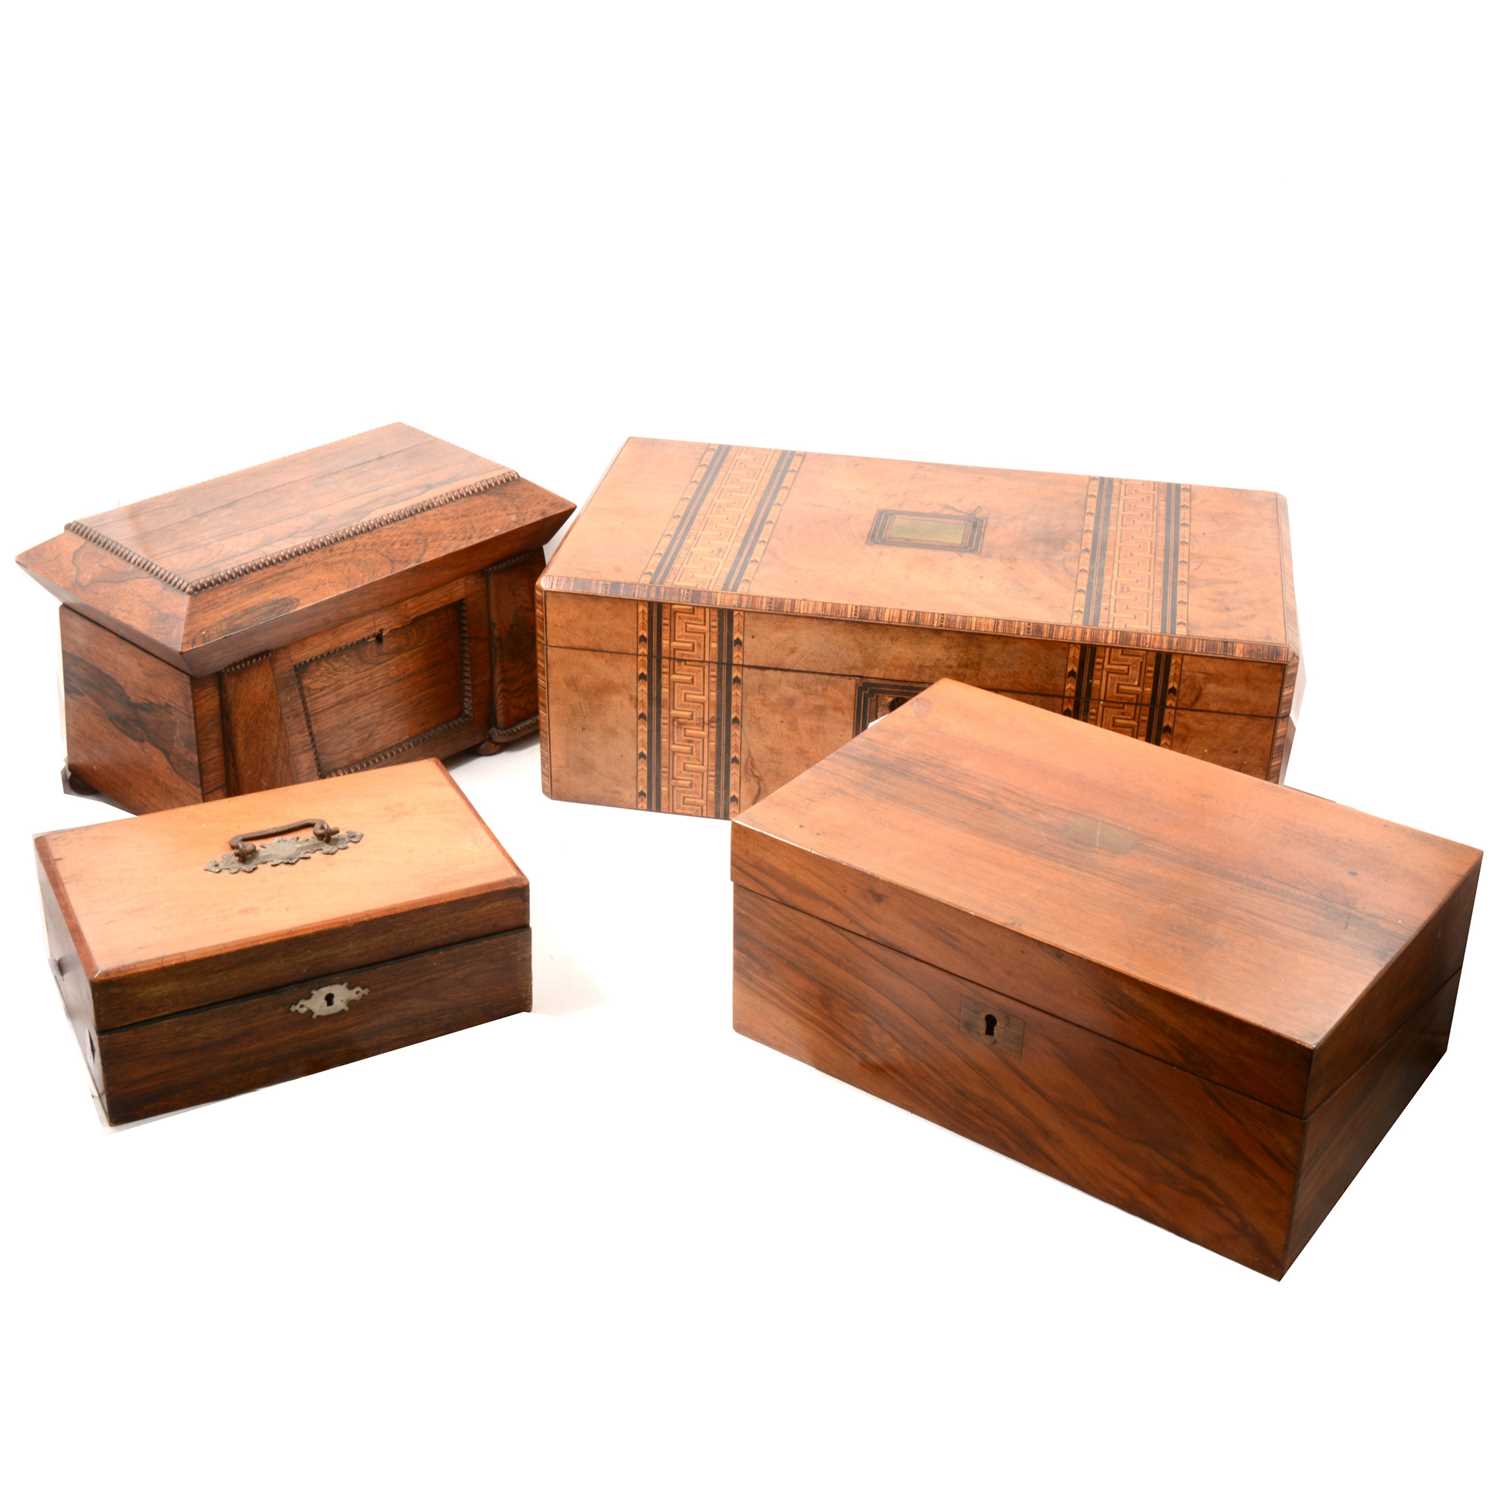 Lot 164 - Victorian walnut writing boxes, rosewood sarcophagus and other wooden boxes.